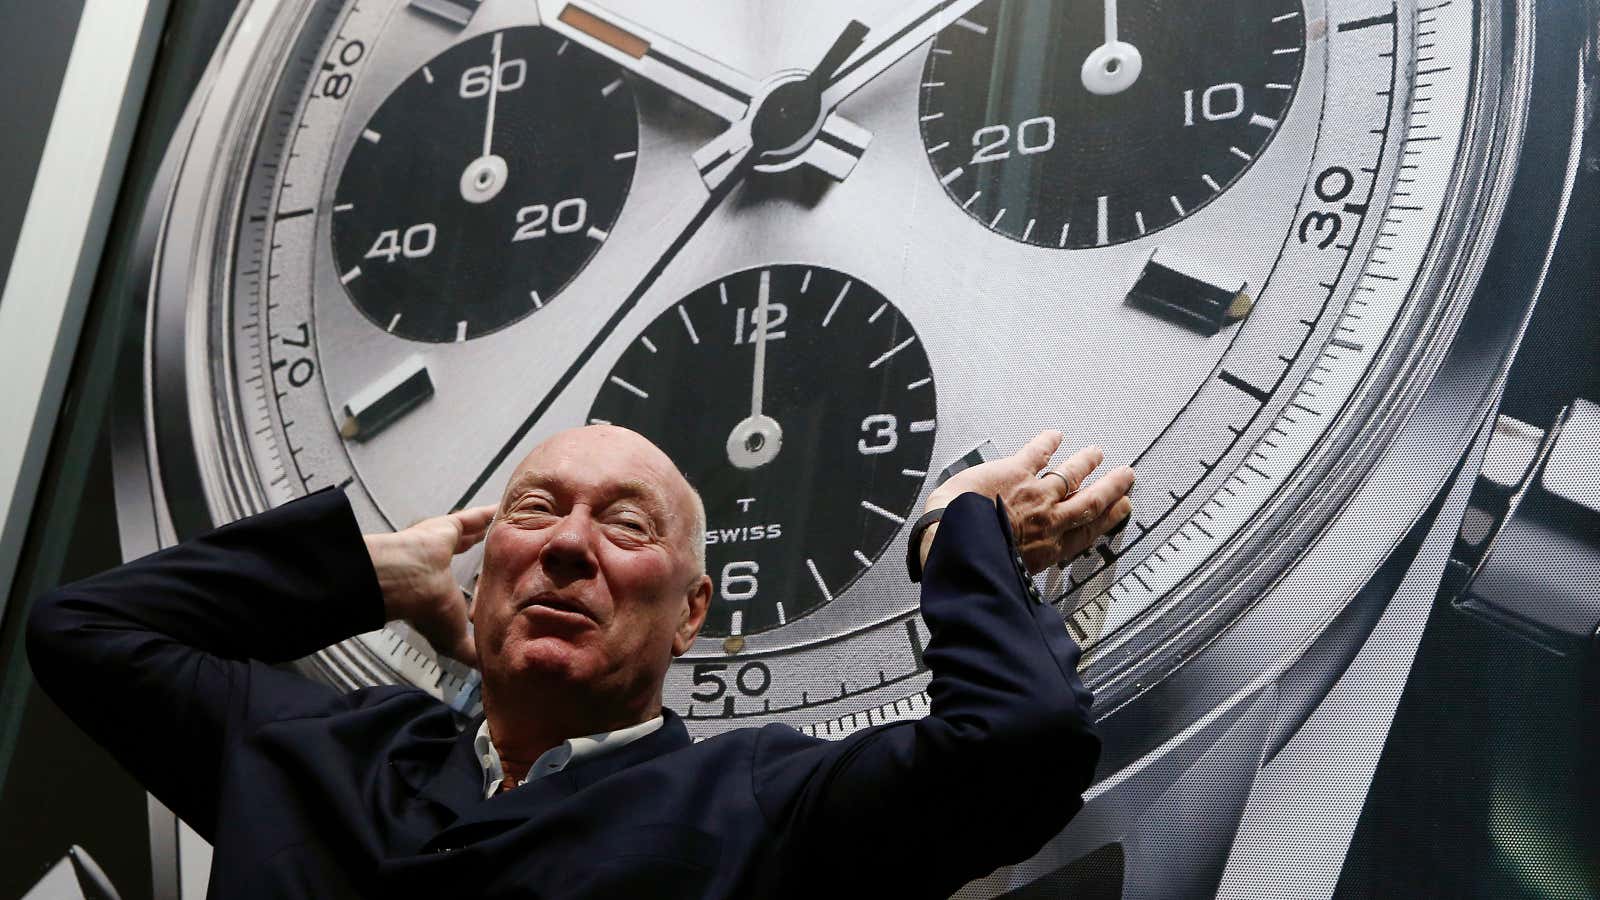 Tag Heuer’s Jean-Claude Biver has his back to the wall.